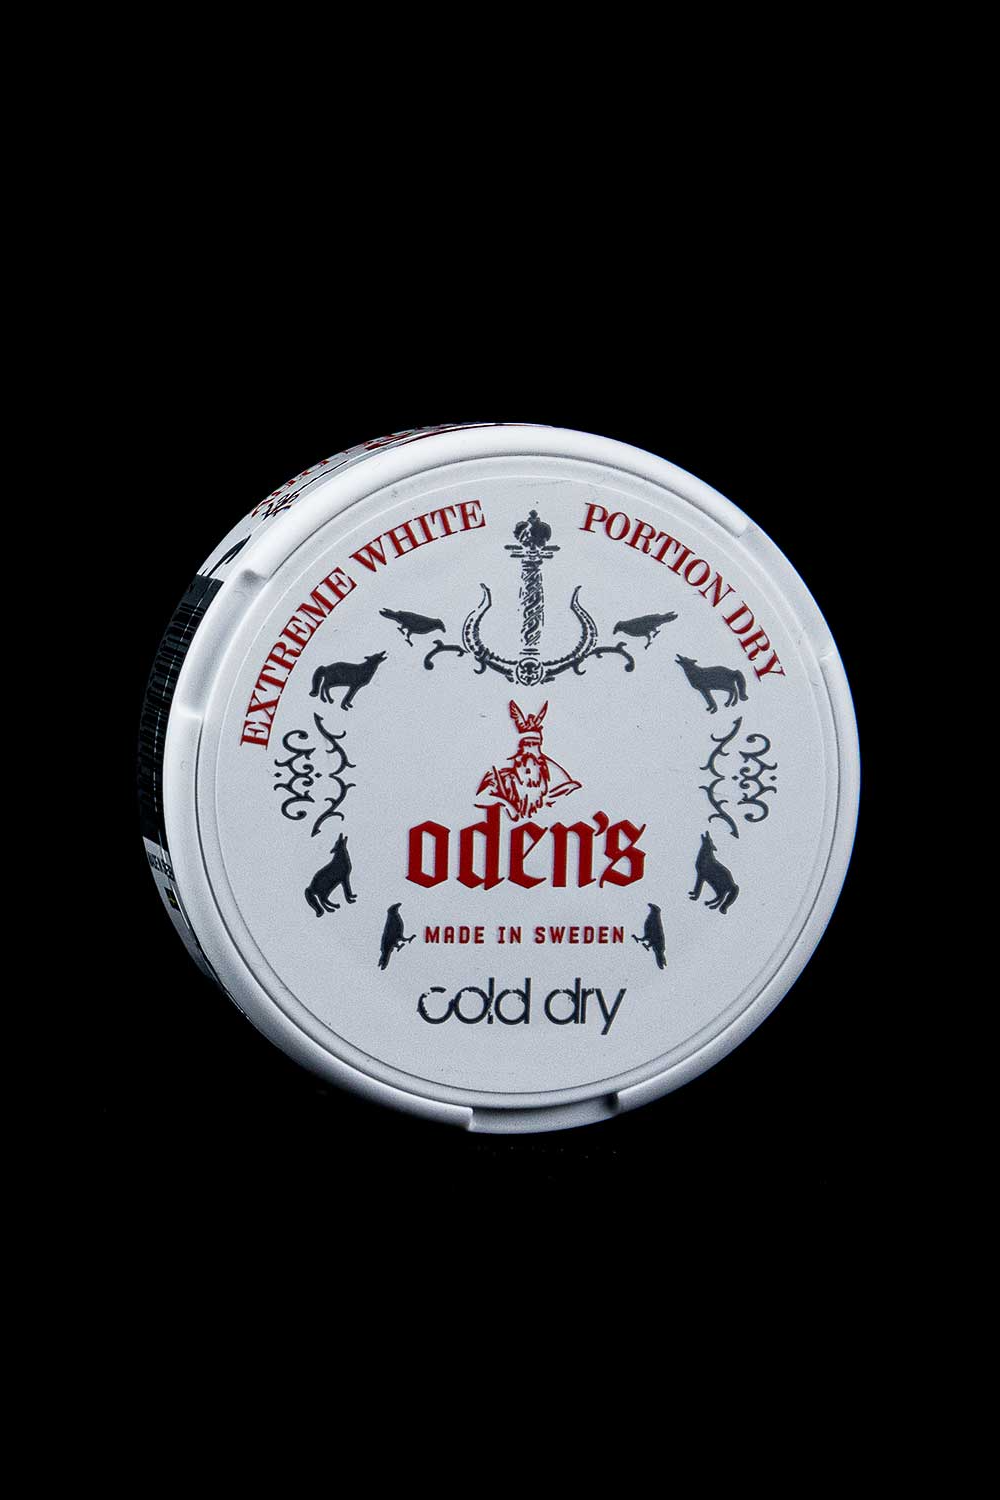 Odens Cold Dry snus